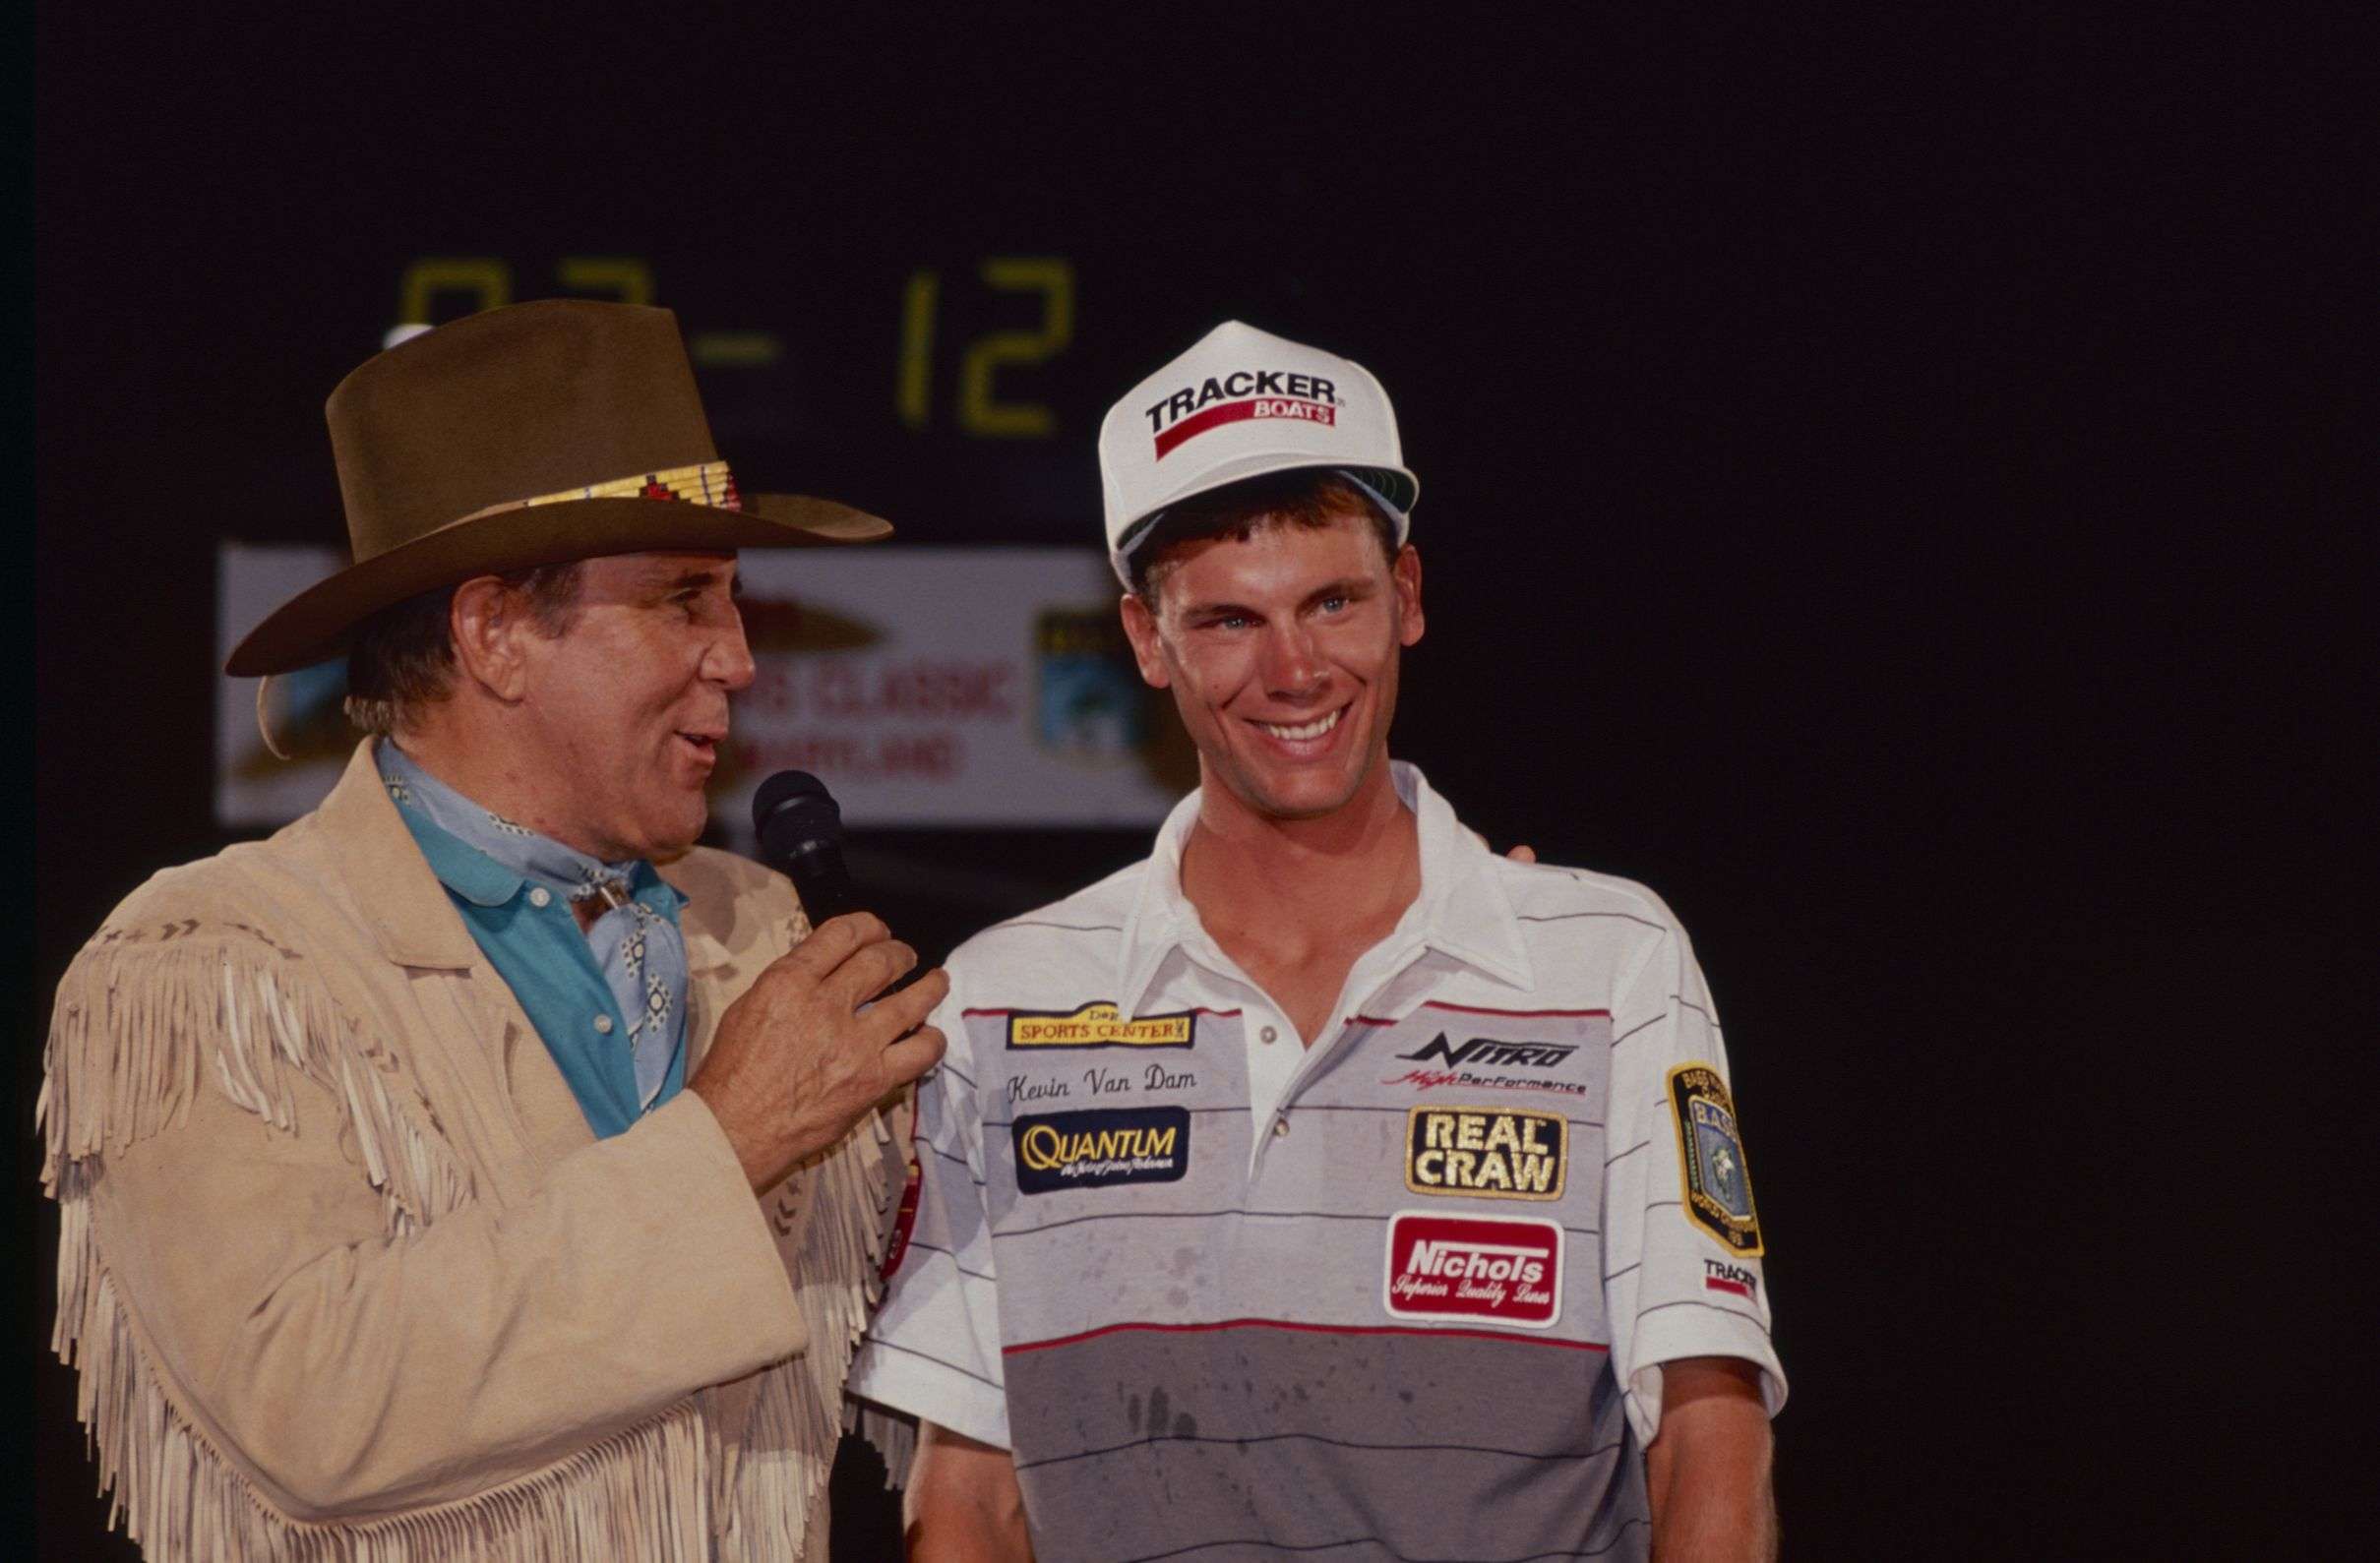 KVD won his first Angler of the Year title in 1992, his second year on the Bassmaster tournament trail. Making him the youngest man to win Angler of the Year.